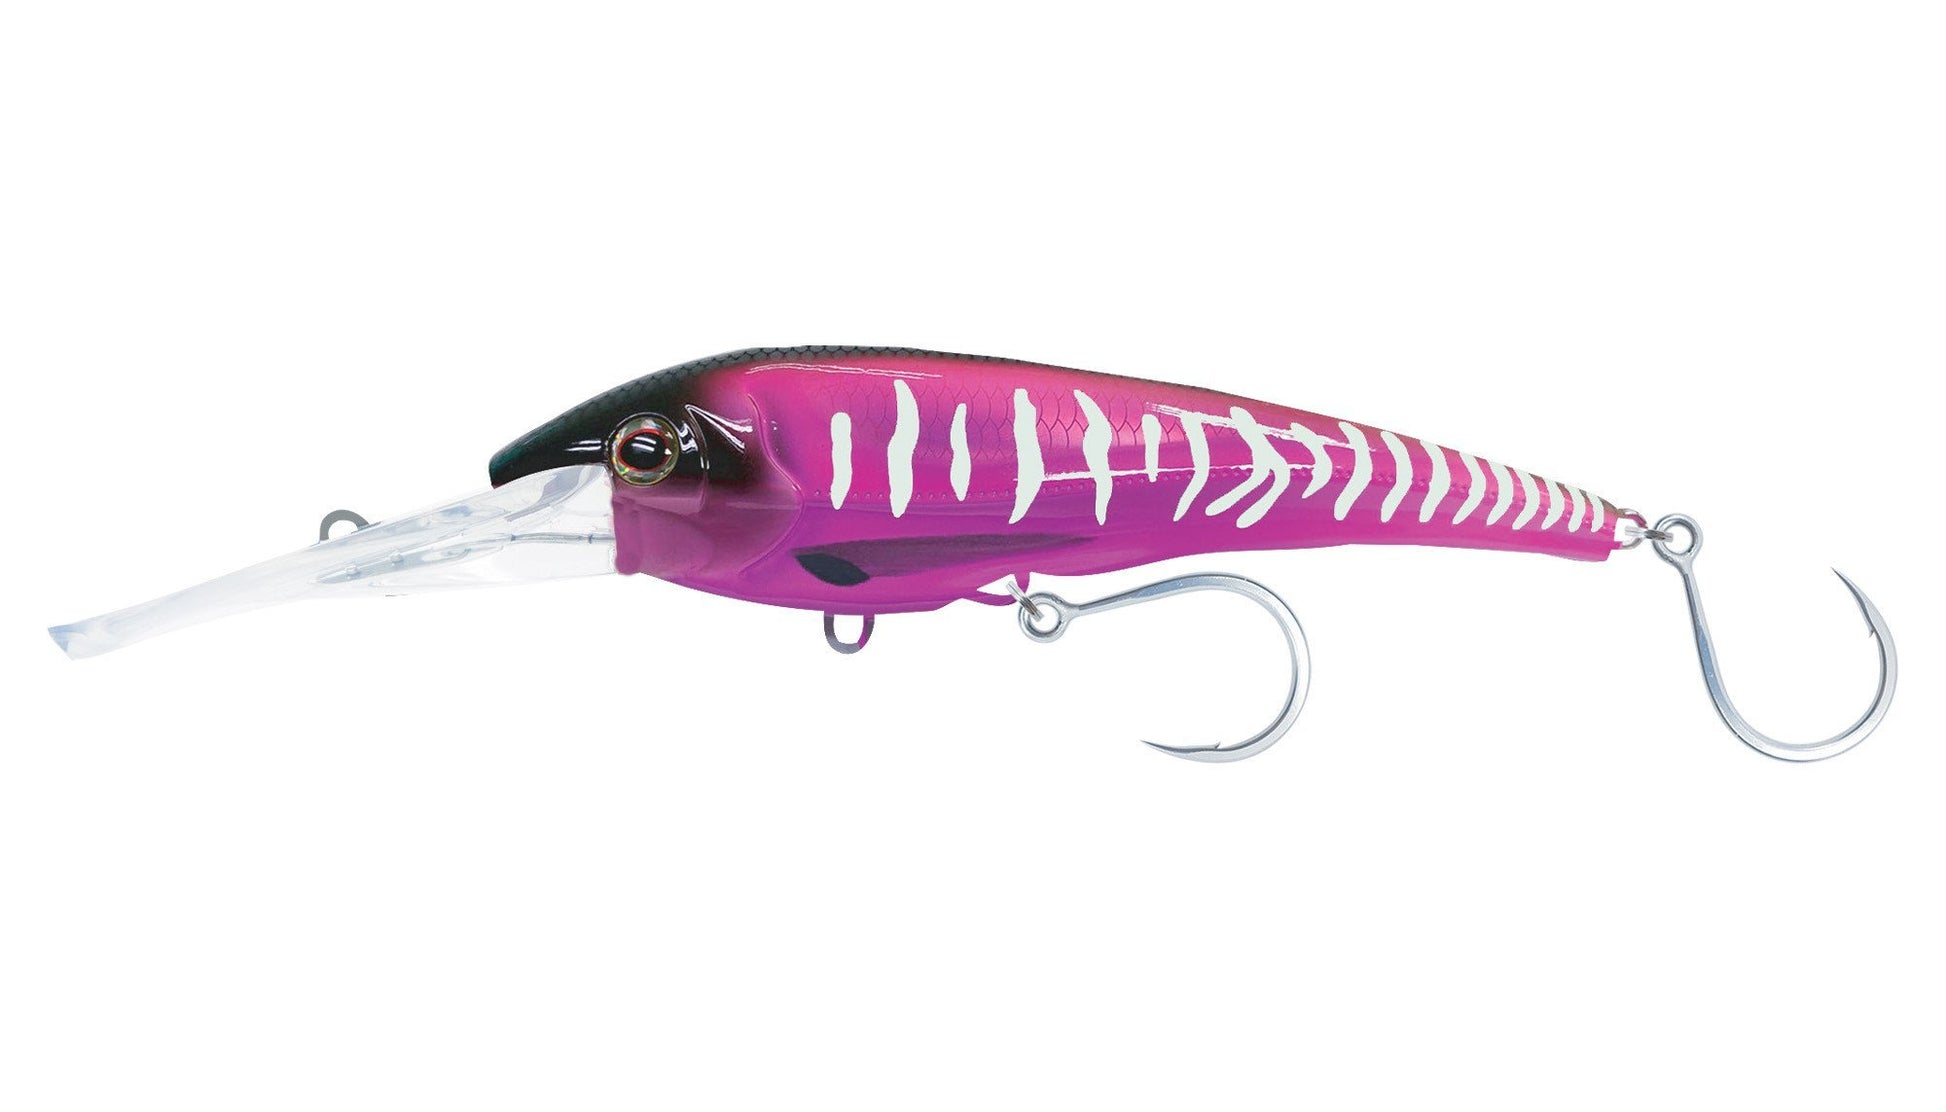 Trolling Lure - Nomad DTX Minnow 220MM/50ft - The Fishermans Hut